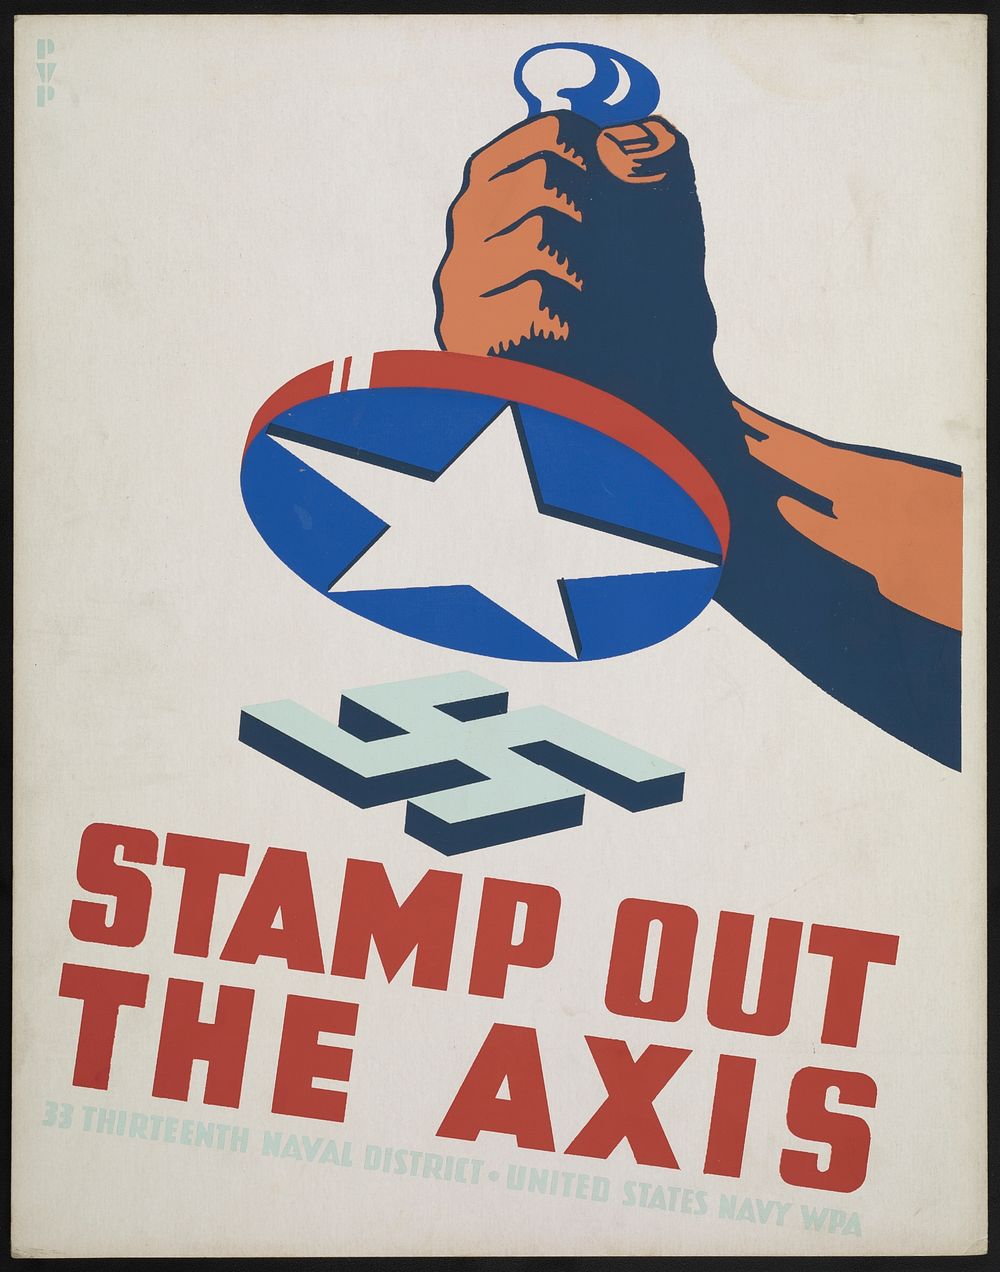 Stamp out the Axis (1941) poster by P.V.P. Original public domain image from Library of Congress. Digitally enhanced by…